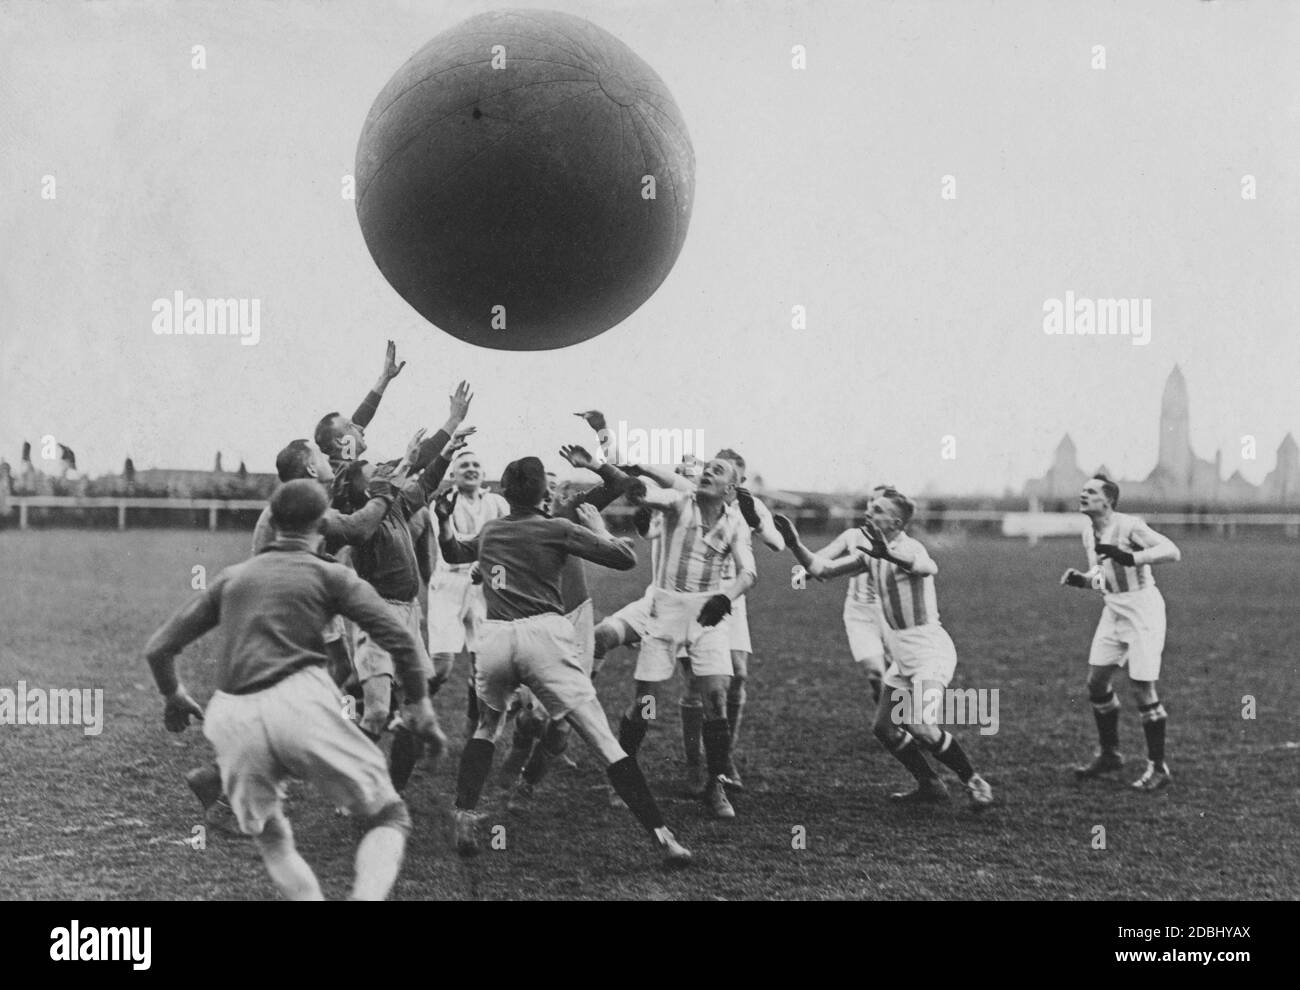 In a pushball competition Leipzig plays against Halle. A 1.8 meter high and 23 kg heavy ball is to be brought into the opponent's goal, whereby almost all techniques are allowed. The men hold the ball high in the air. Stock Photo